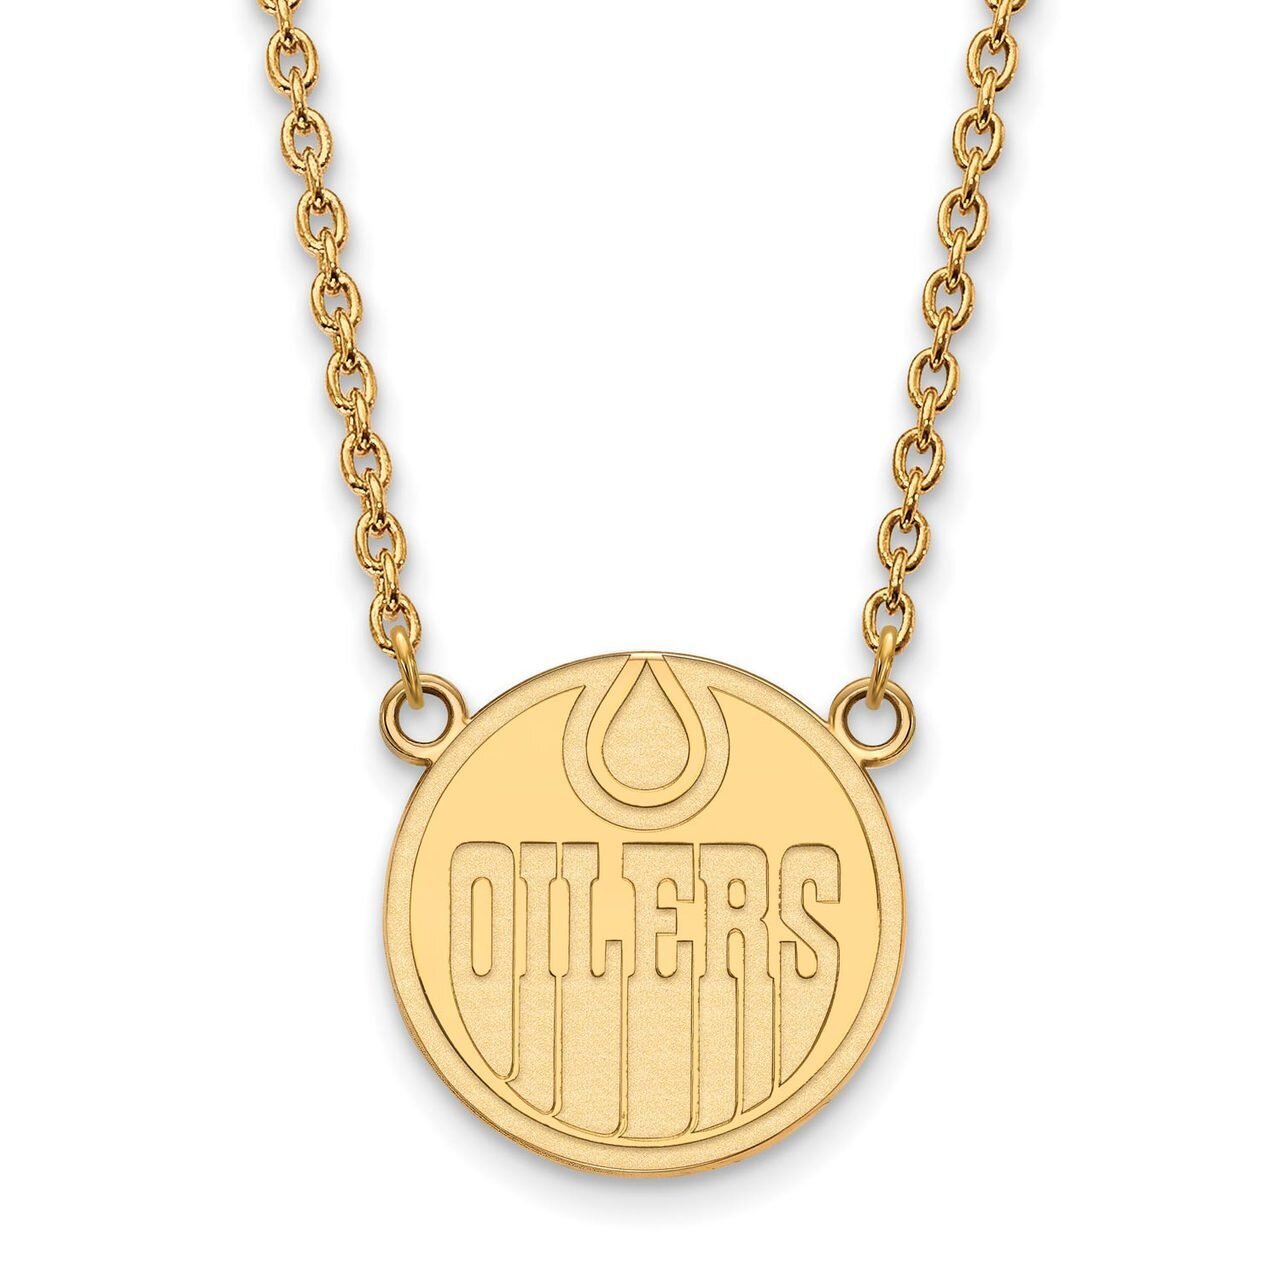 Edmonton Oilers Large Pendant with Chain Necklace Gold-plated Silver GP008OIL-18